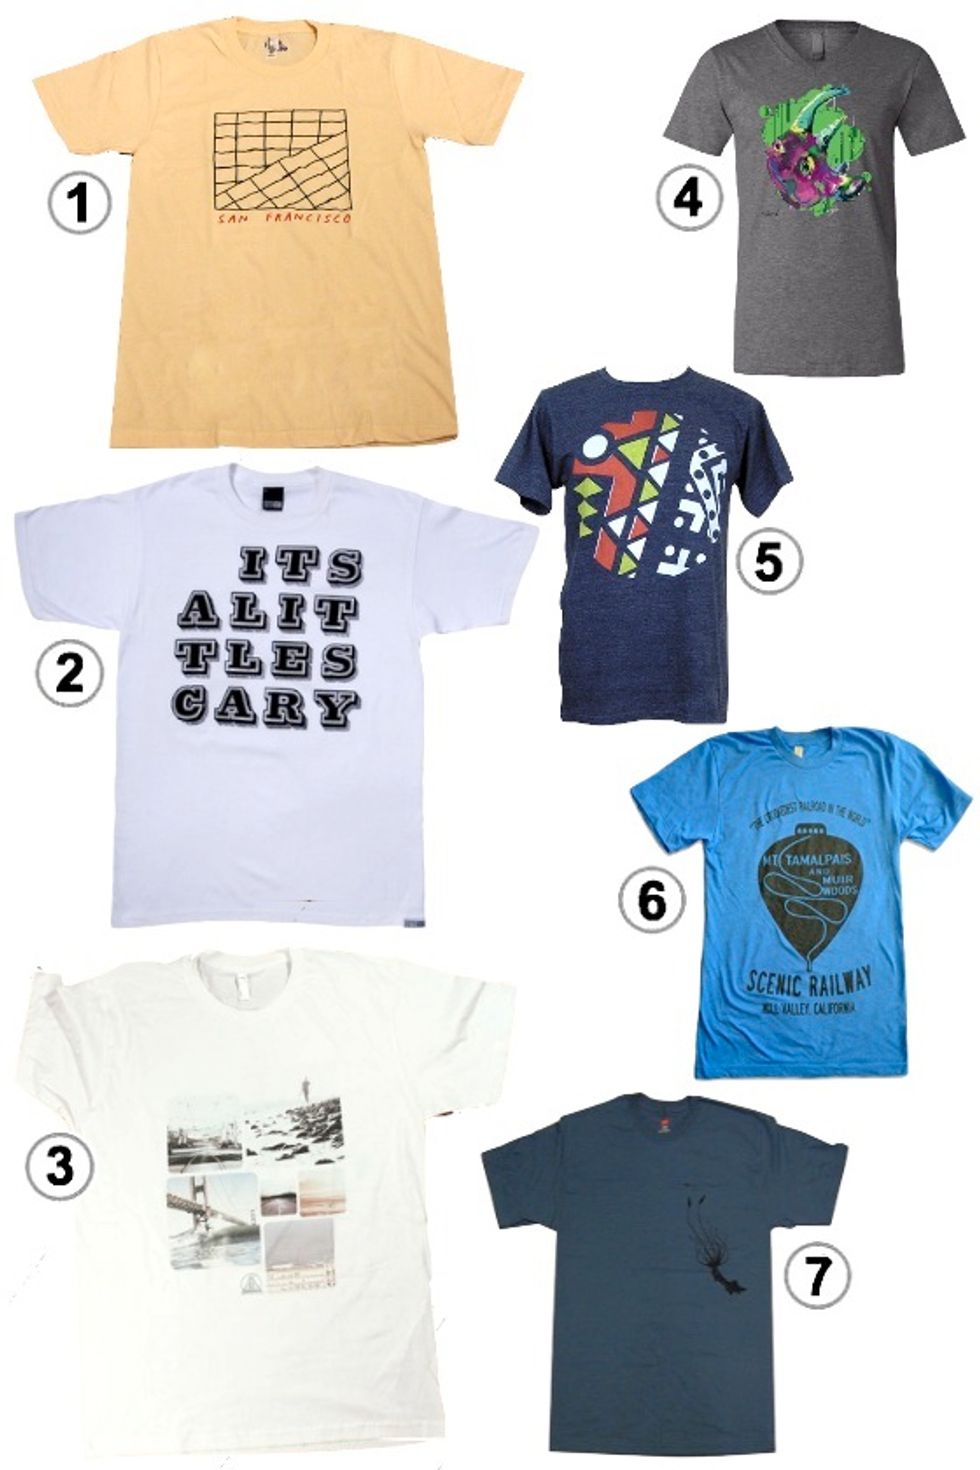 Look of the Week: Locally Designed Men's T-Shirts